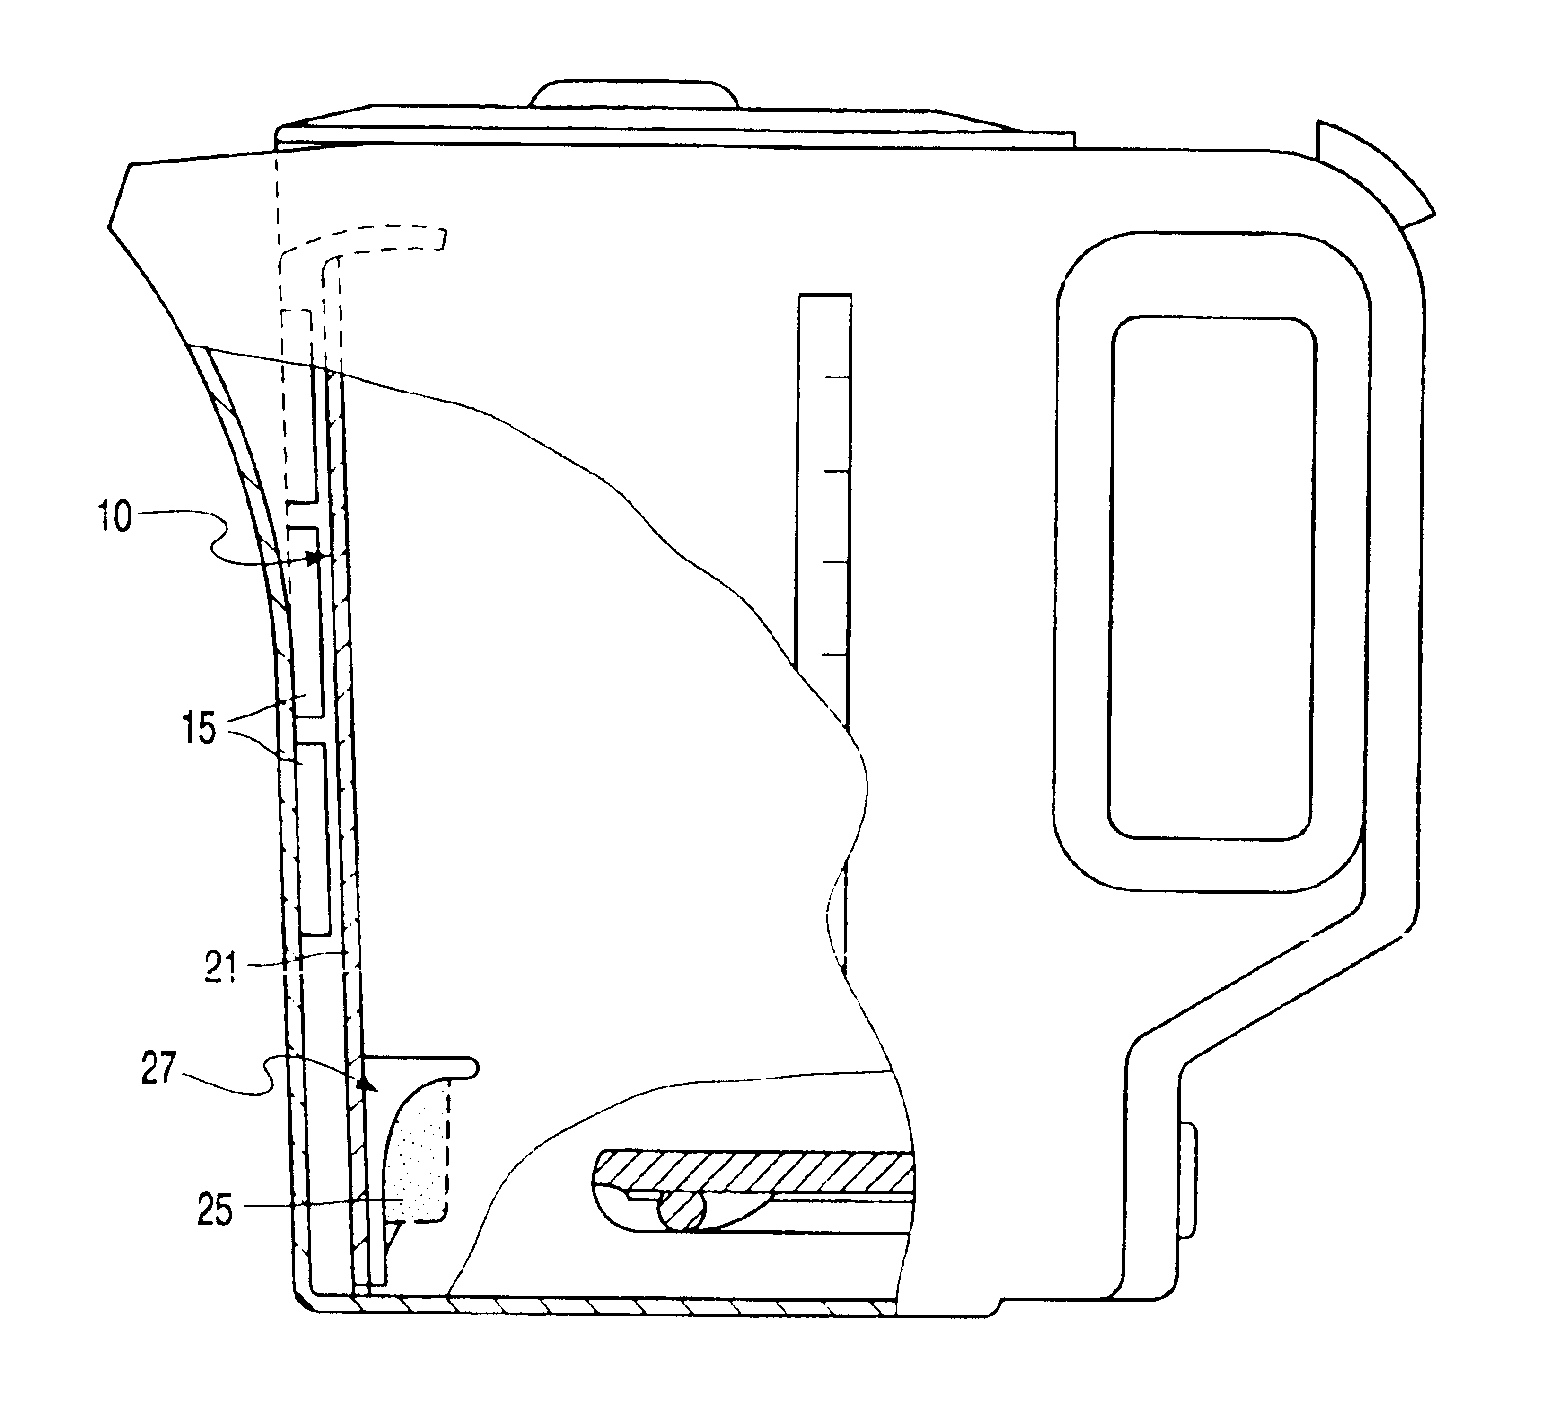 Removable filters and water heating vessels incorporating such